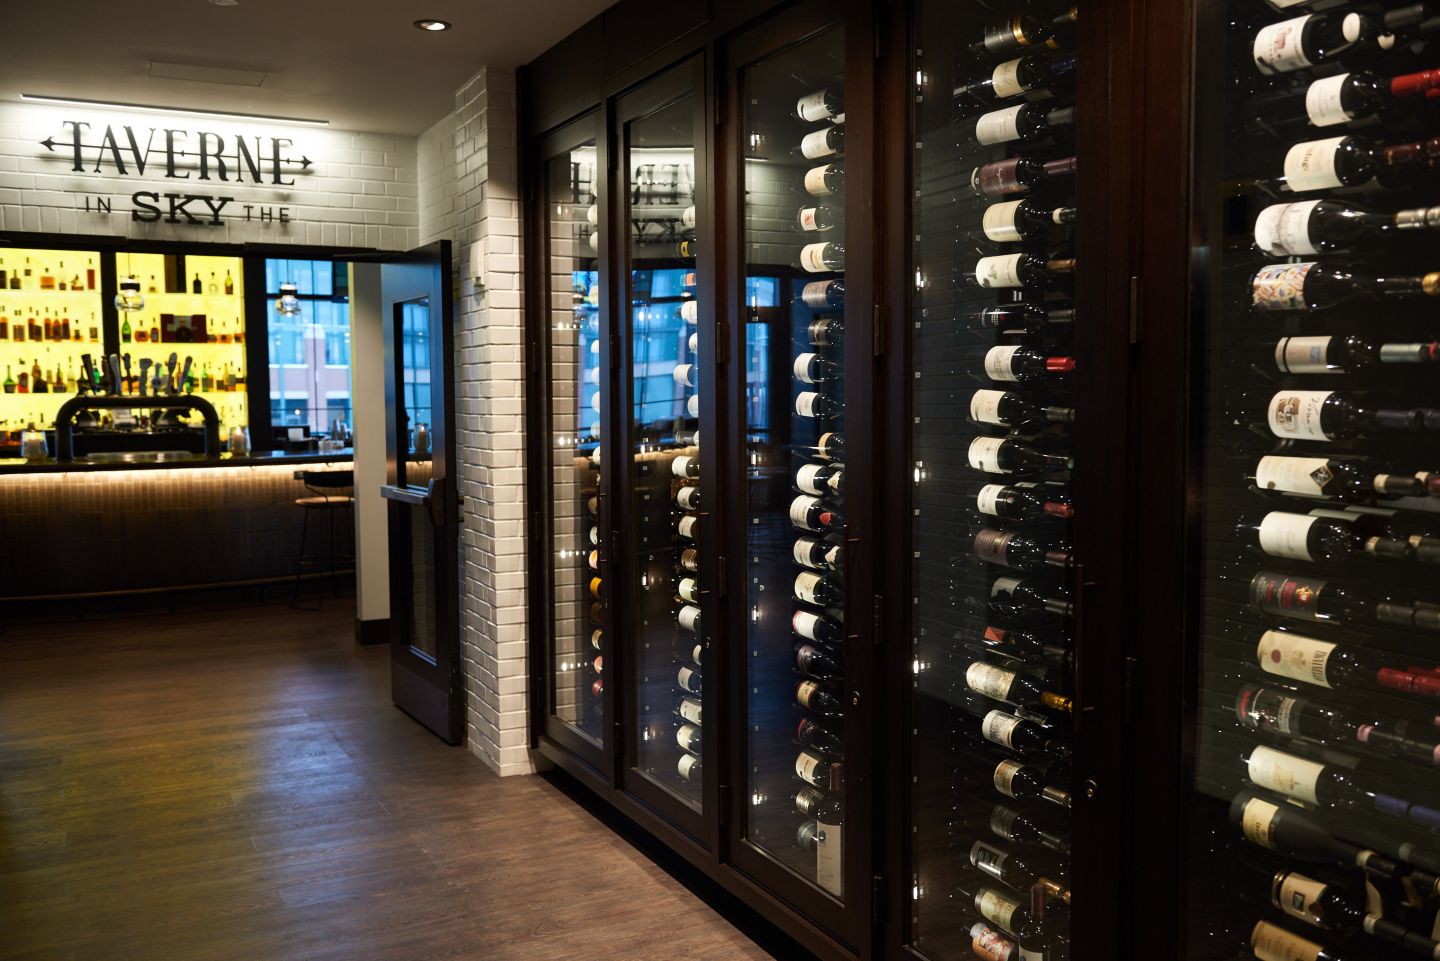 the wine wall at Taverne in the Sky